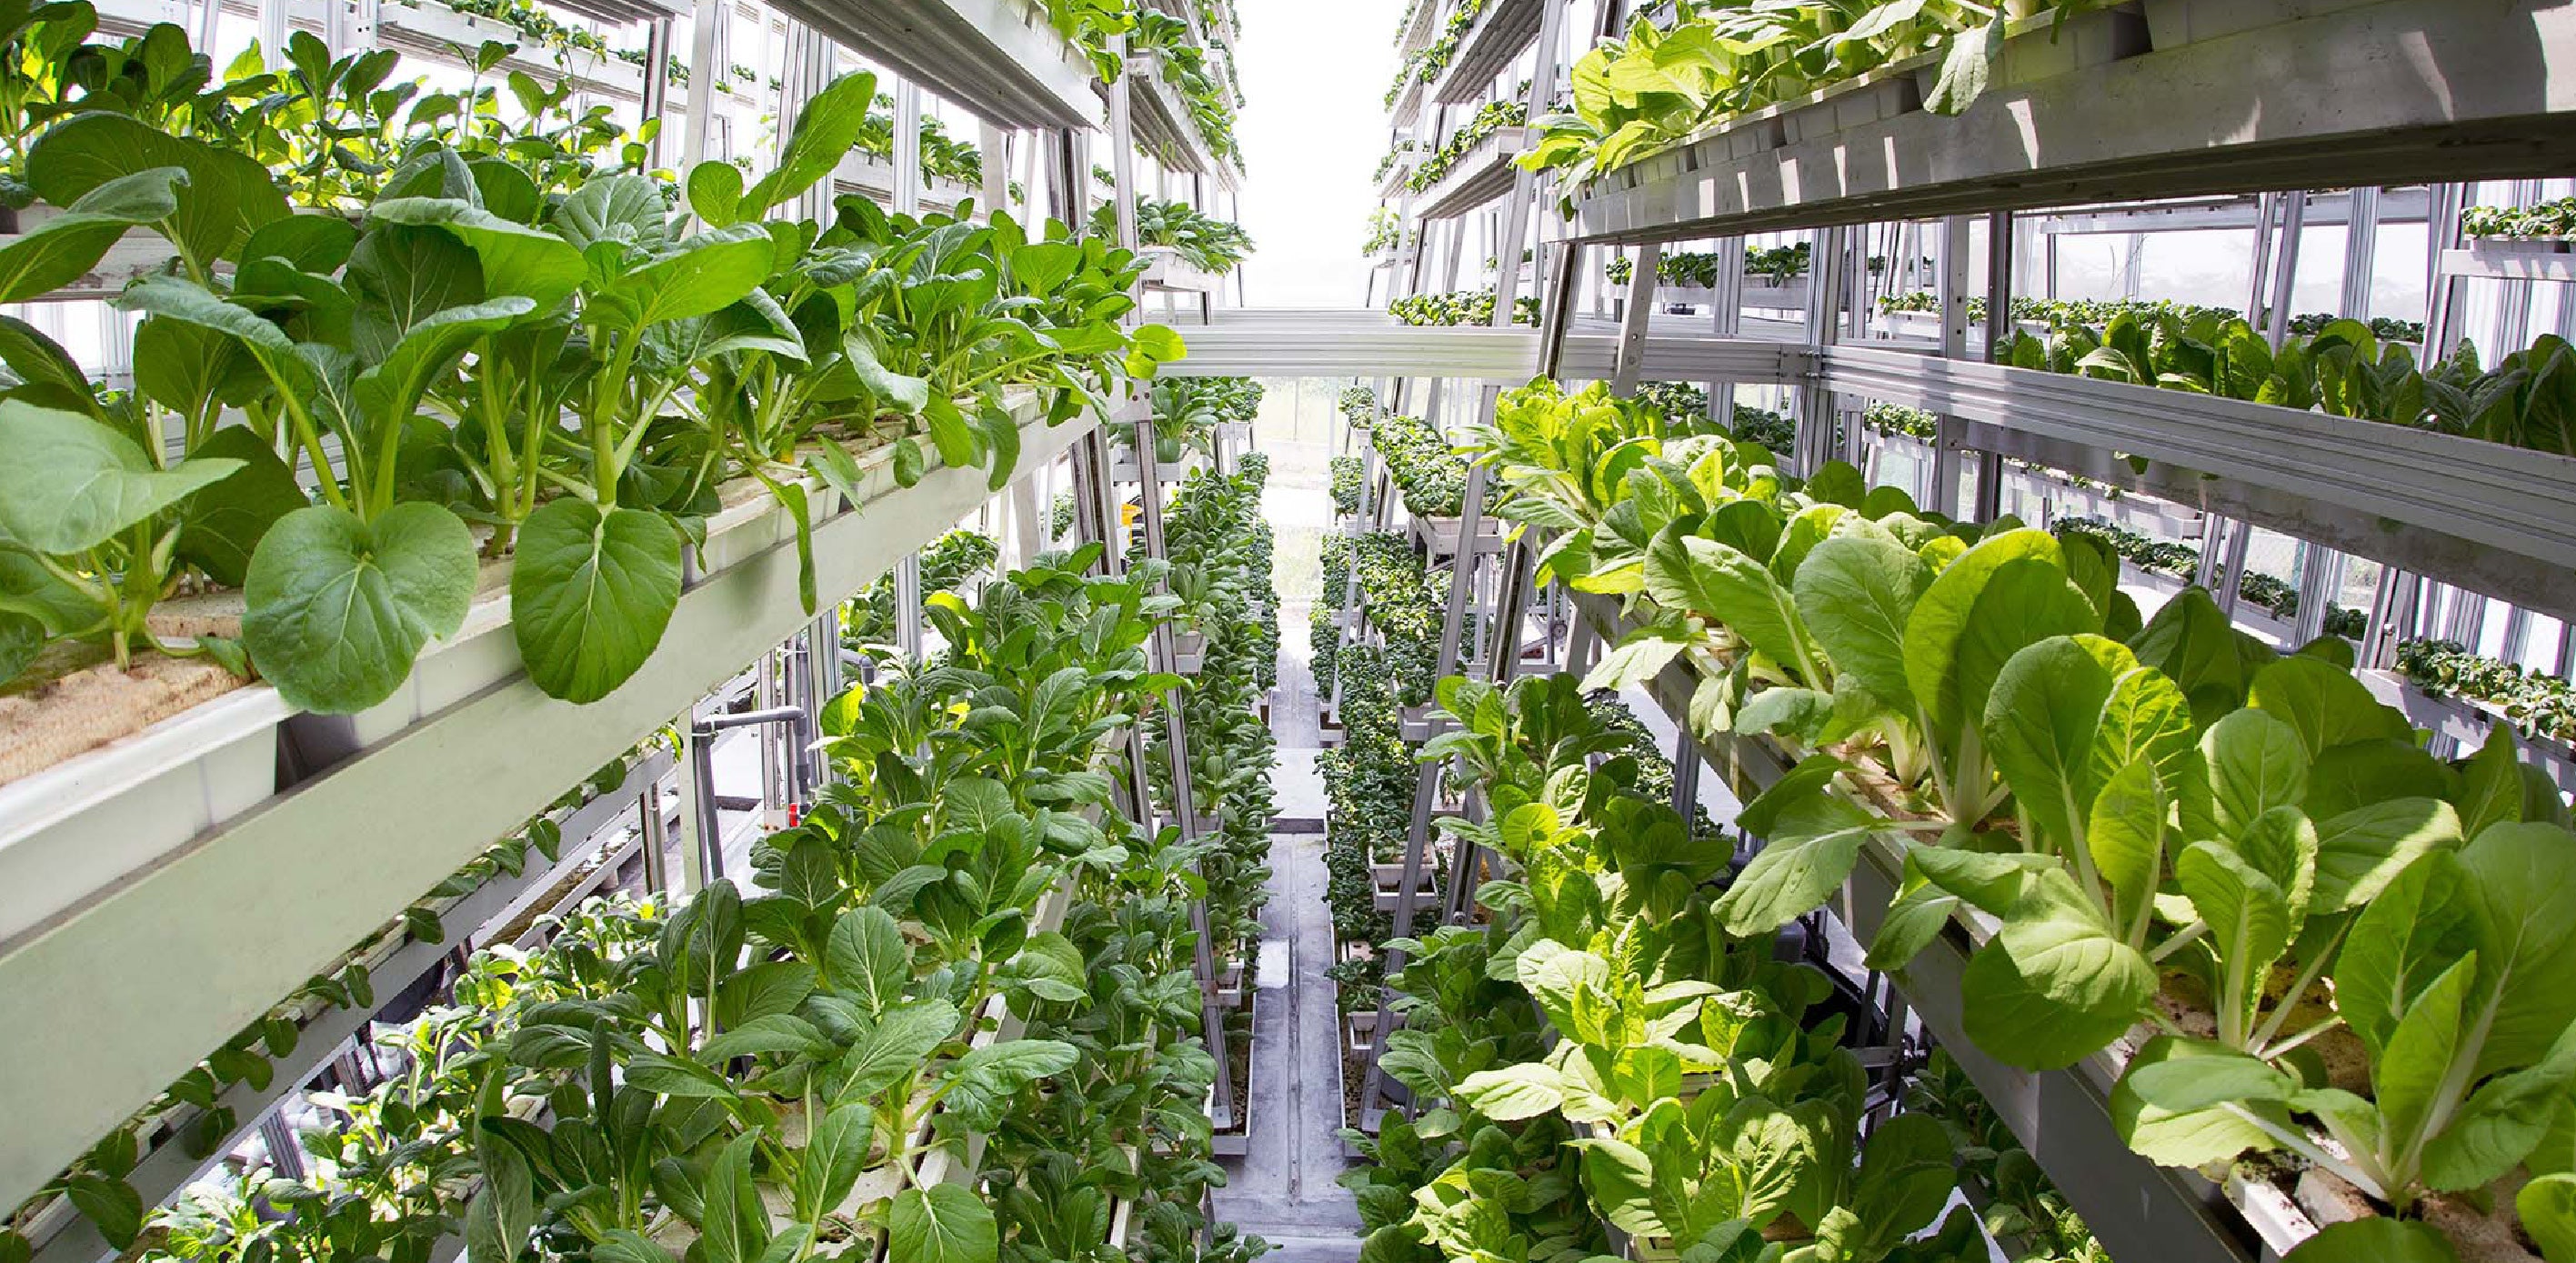 Are indoor vertical farms sustainable farming?